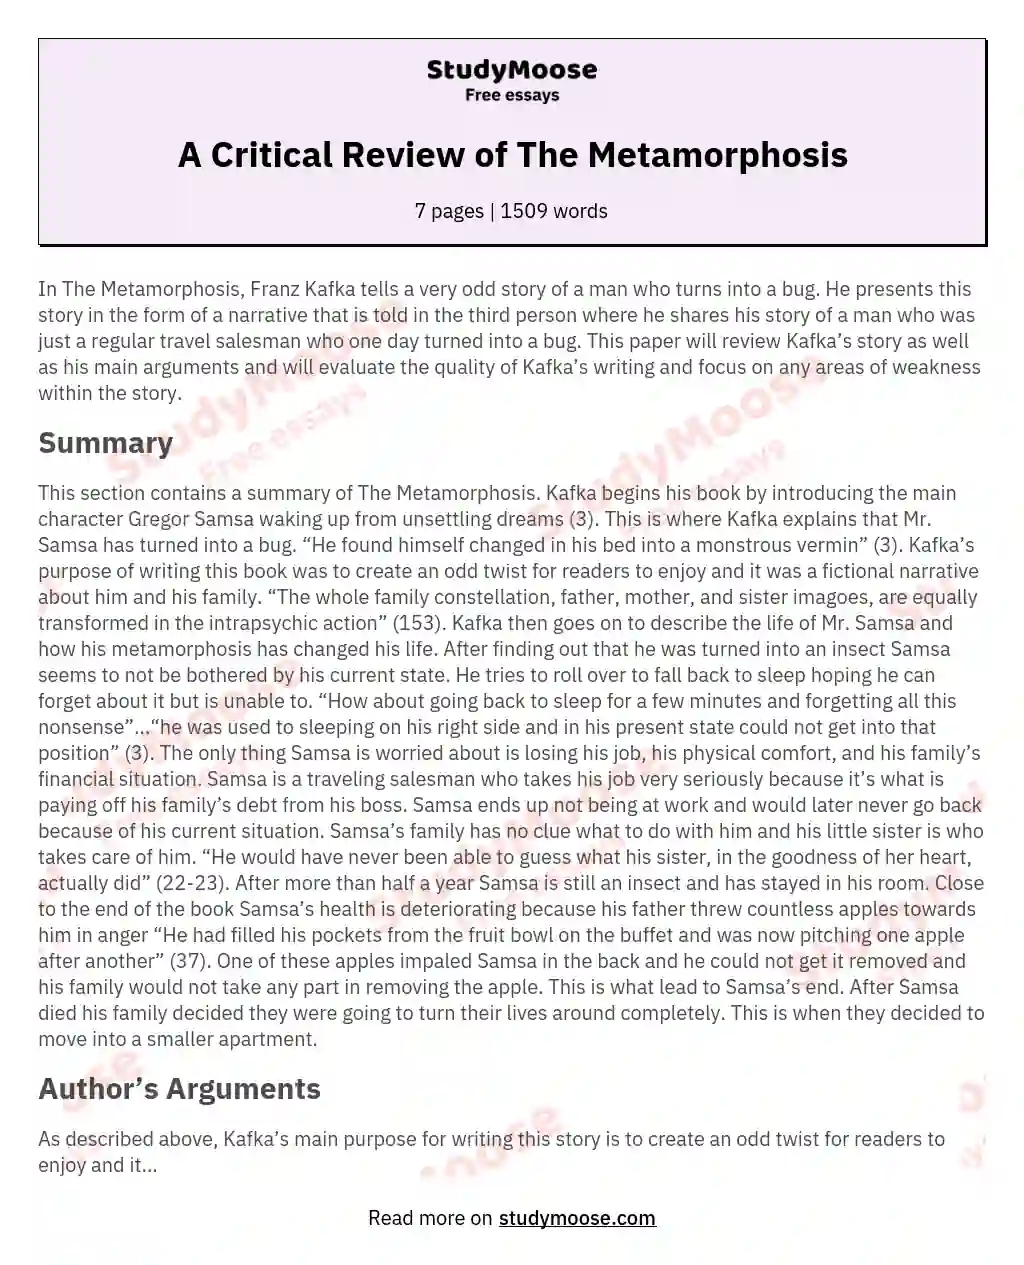 A Critical Review of The Metamorphosis